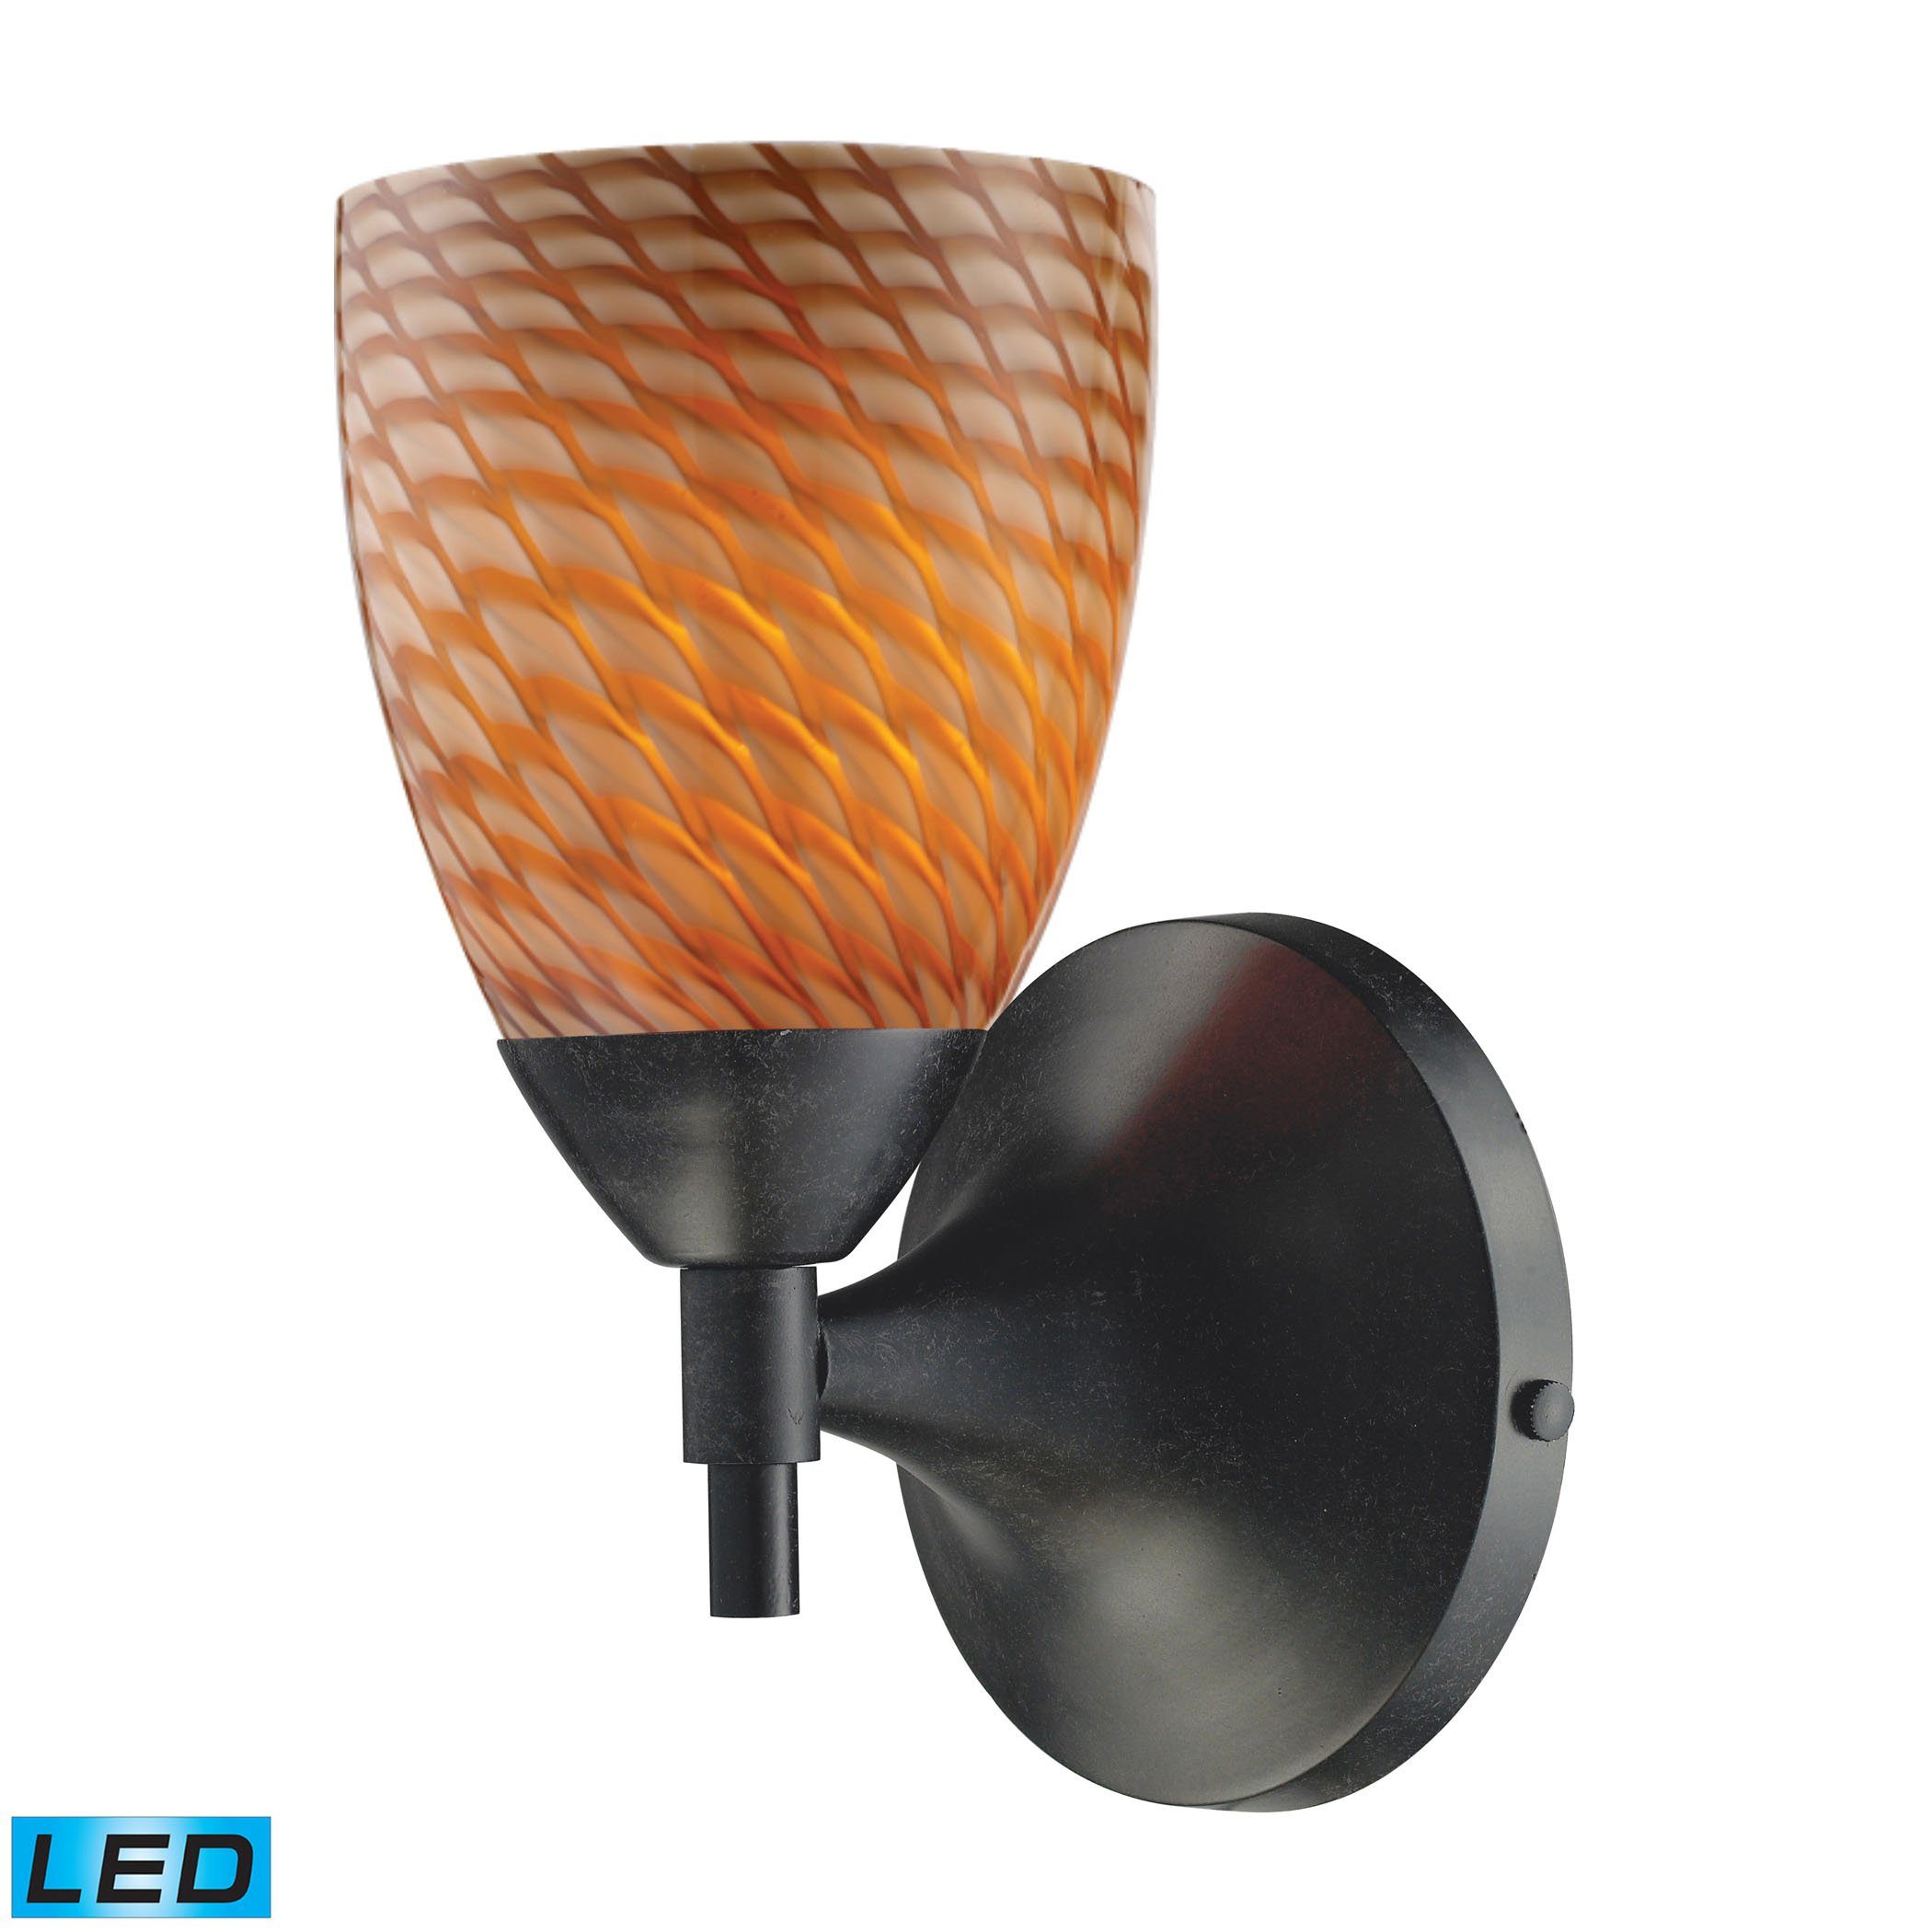 Celina 1 Light LED Sconce In Dark Rust And Cocoa Glass Wall Sconce Elk Lighting 